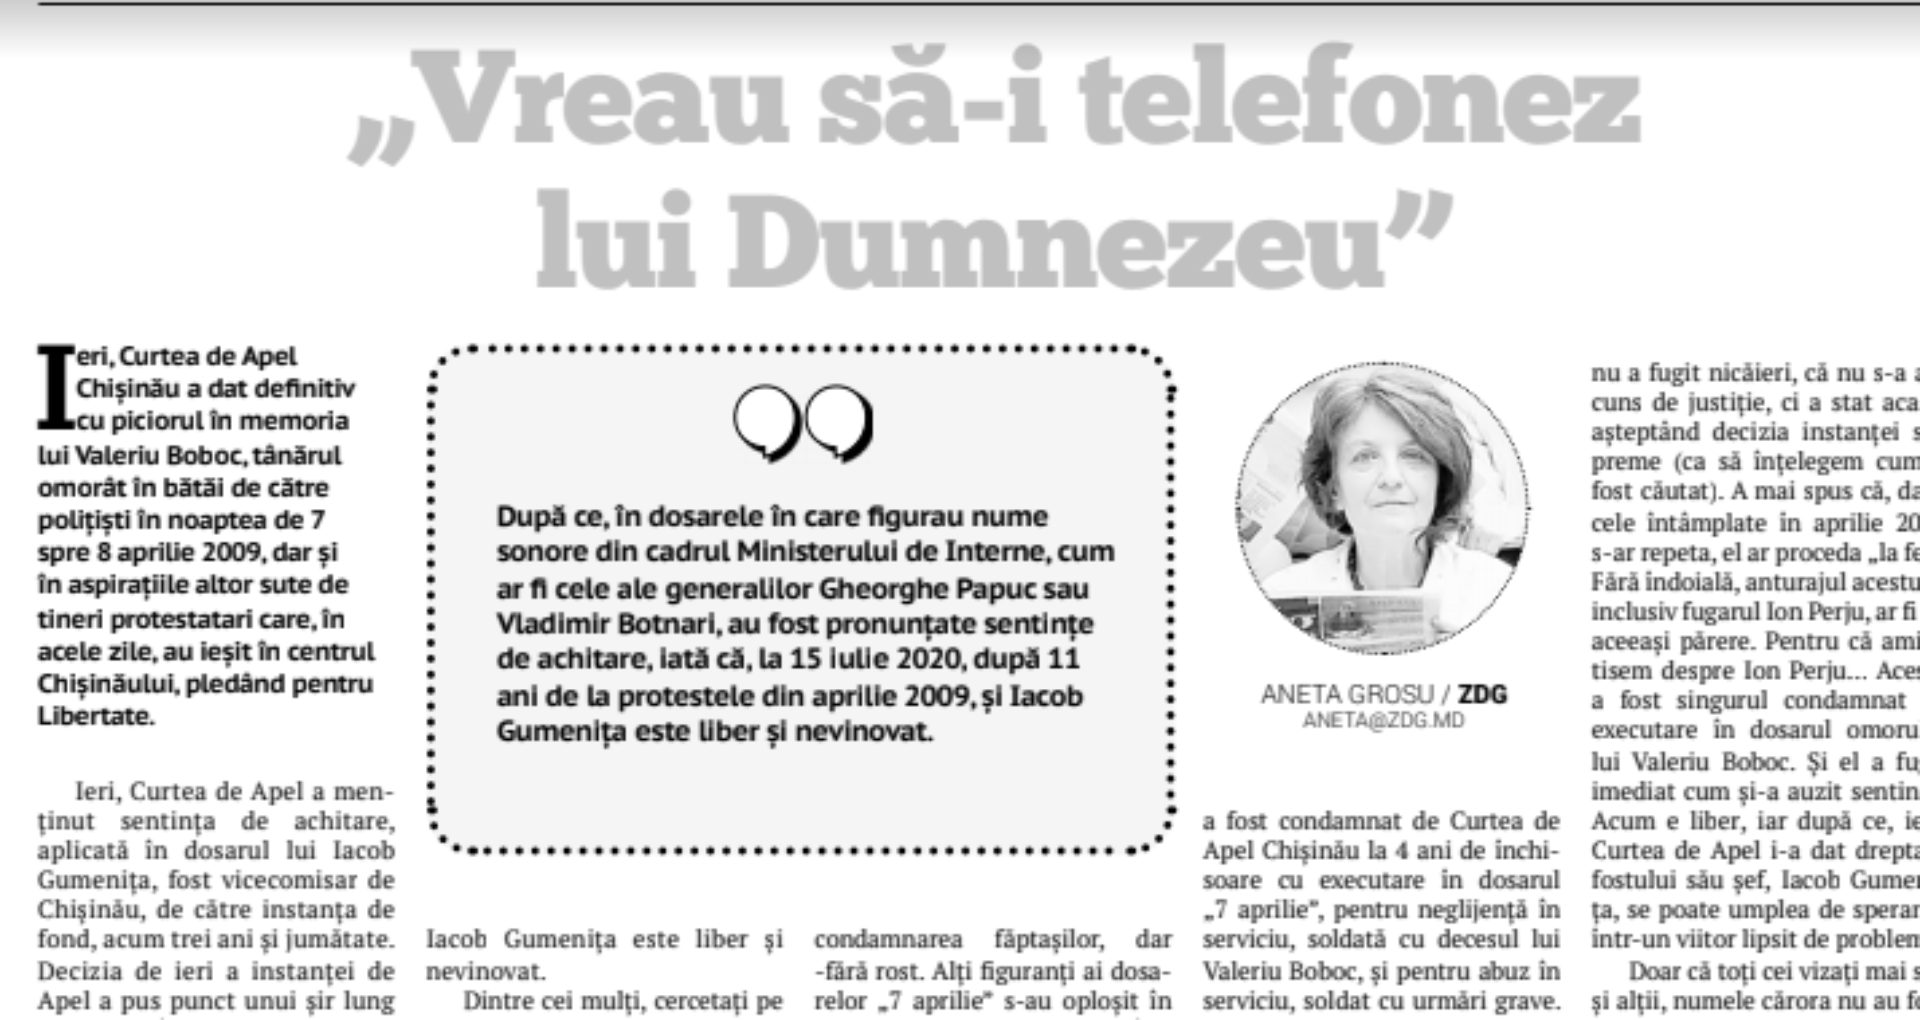 The Decision of the Chișinău Court of Appeal in the case of Iacob Gumeniță